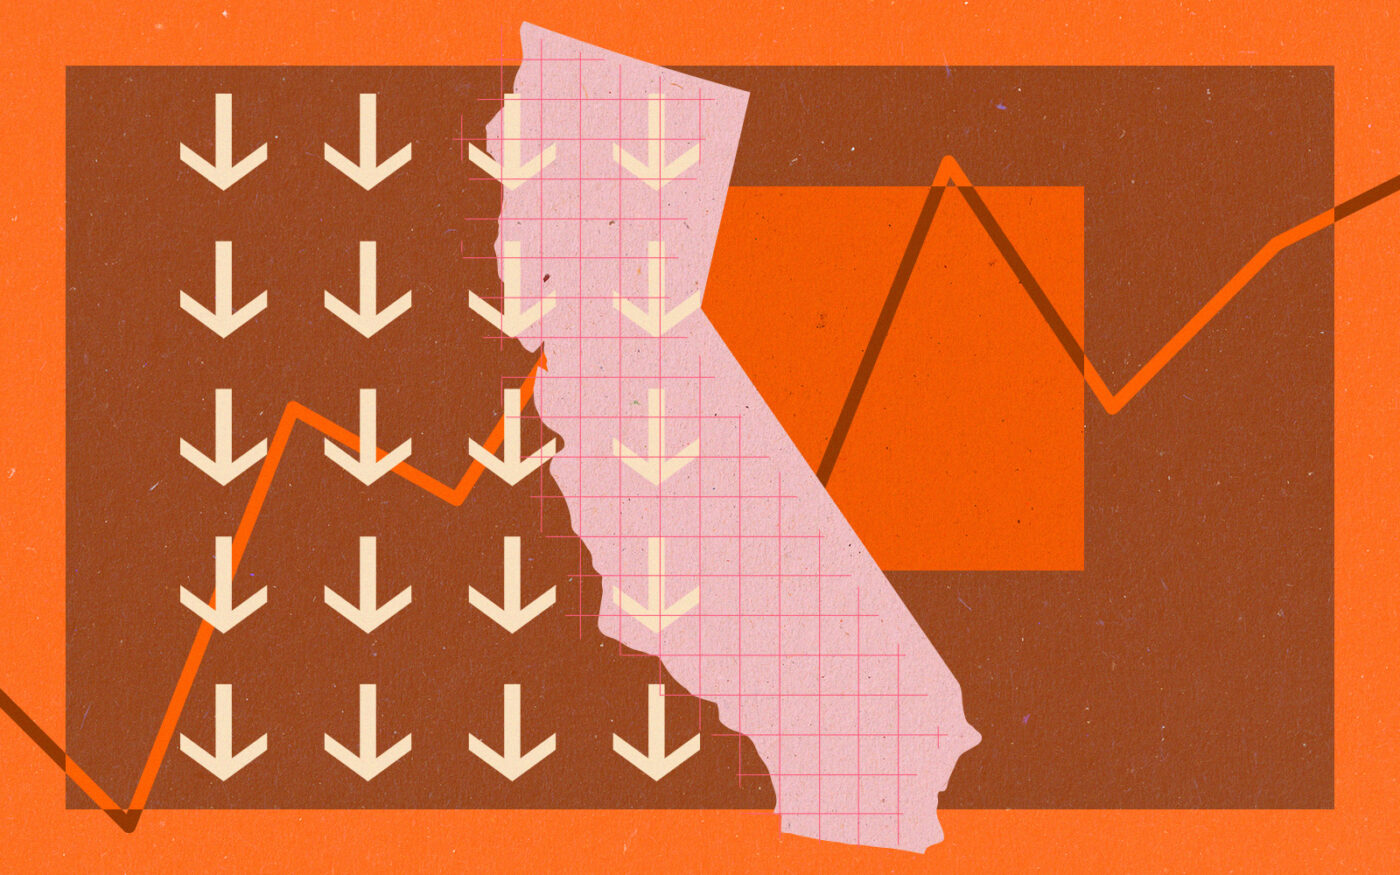 Apartment rents in California fell 2.4% in a year